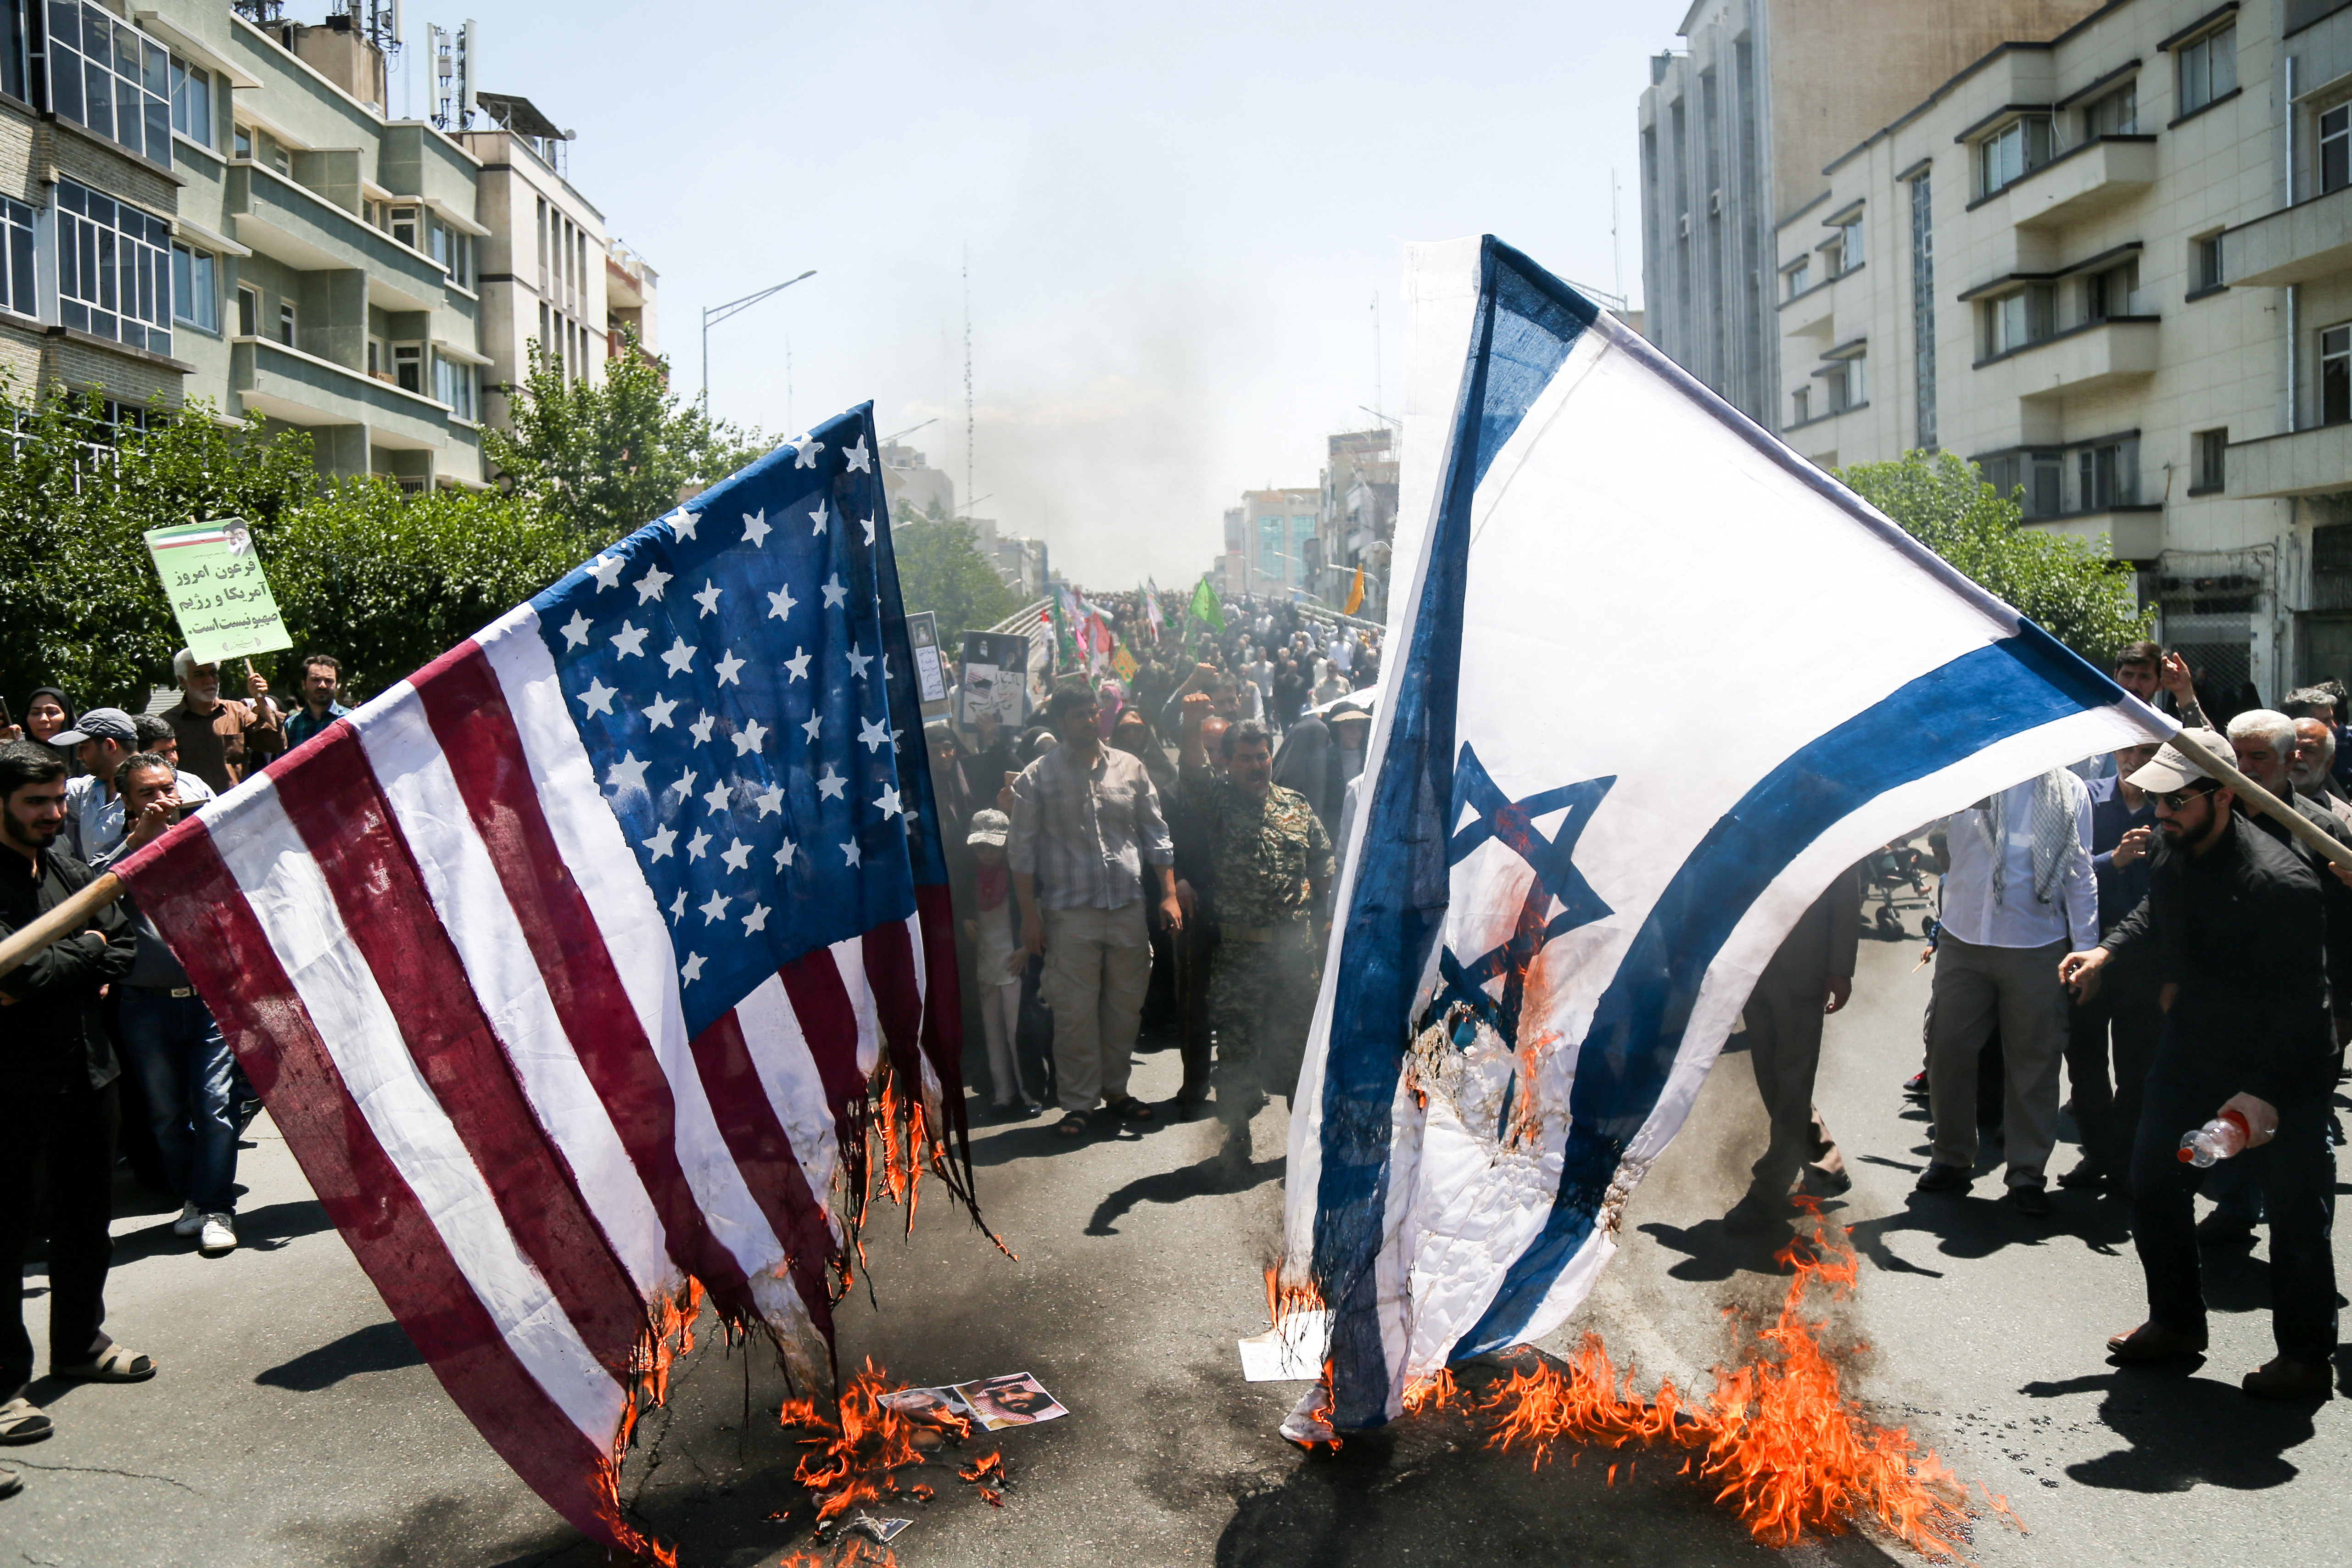 Iranians burn U.S. and Israel flags during a protest marking the annual al-Quds Day (Jerusalem Day) on the last Friday of the holy month of Ramadan in Tehran, Iran